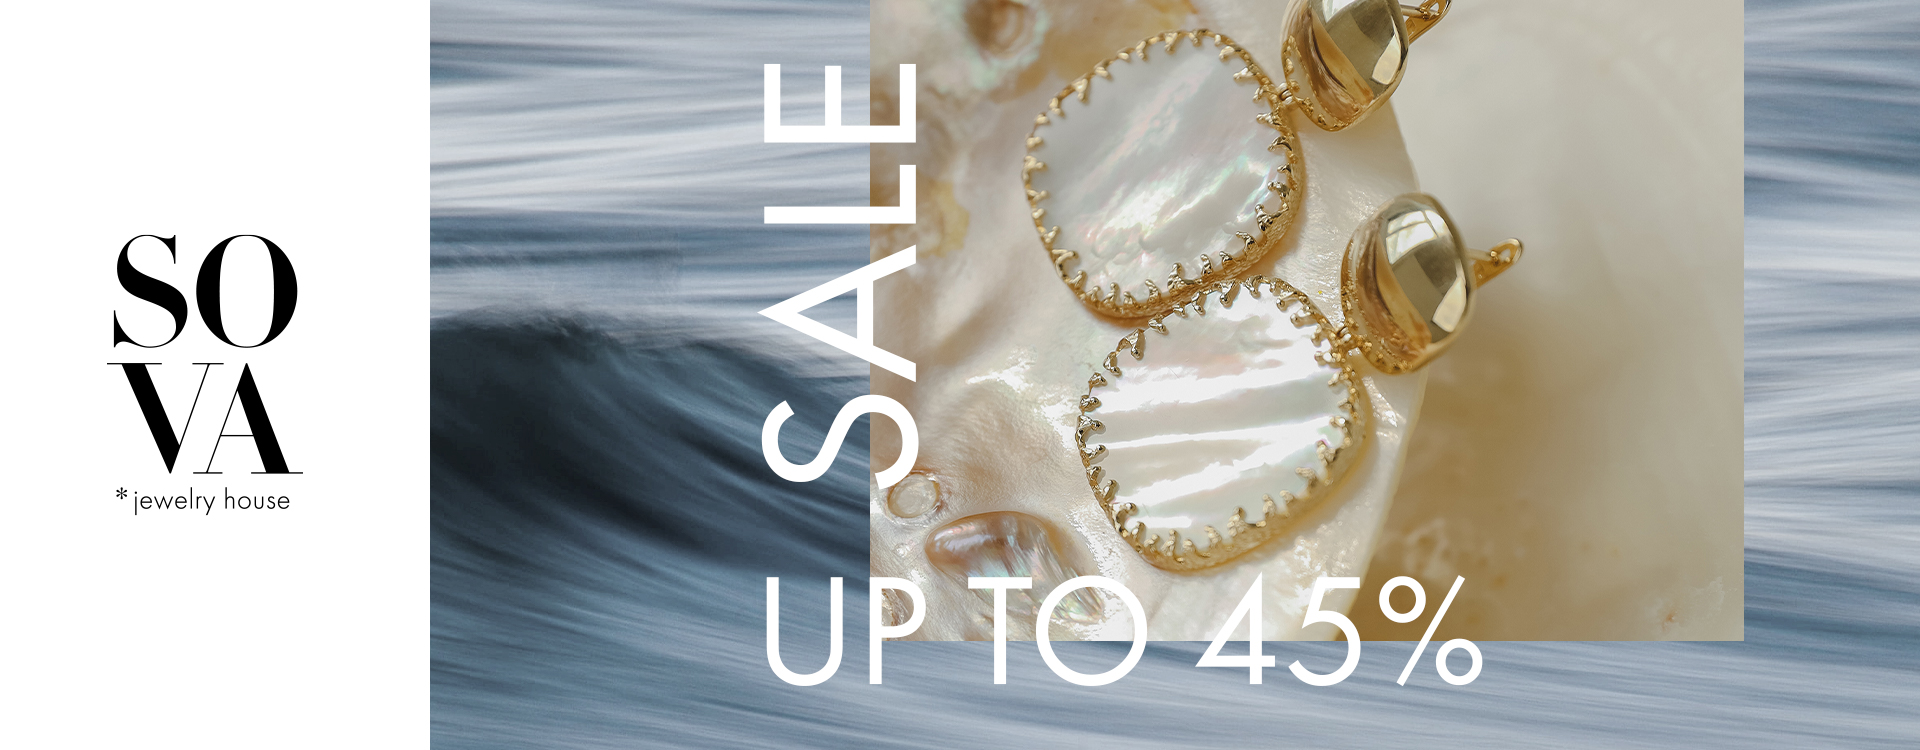 Up to 45% off jewelry at SOVA